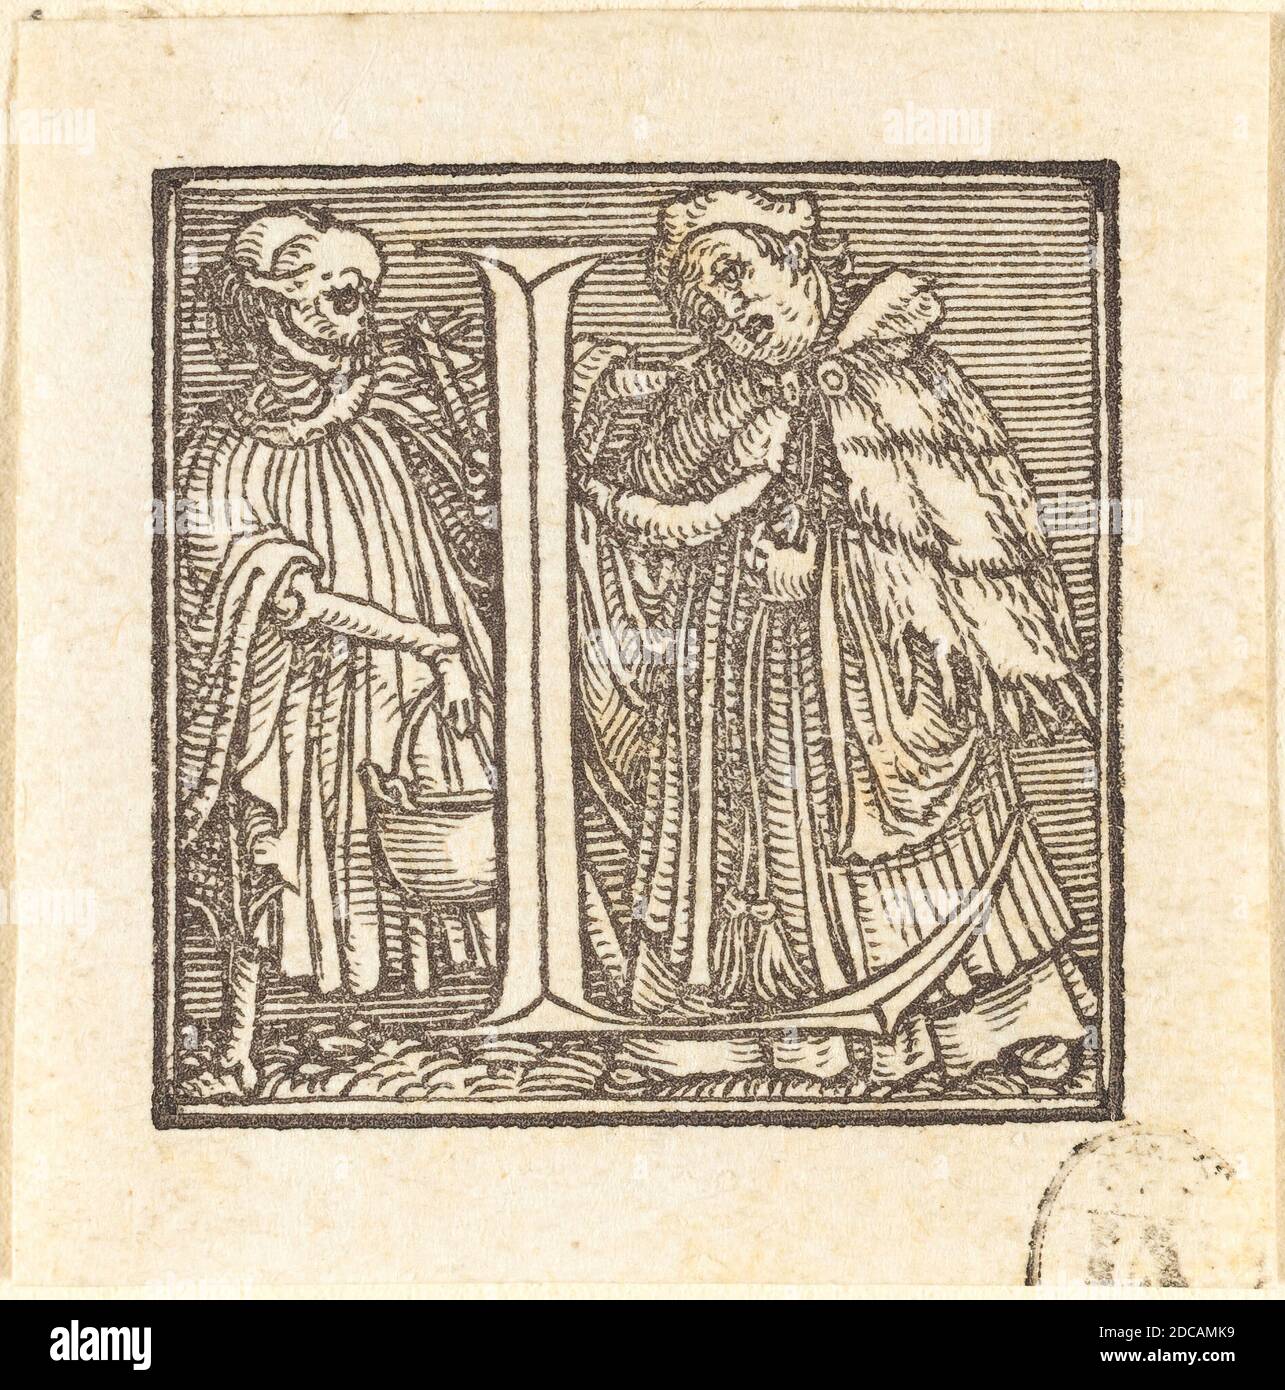 Hans Holbein the Younger, (artist), German, 1497/1498 - 1543, Letter L, Alphabet of Death, (series), woodcut Stock Photo